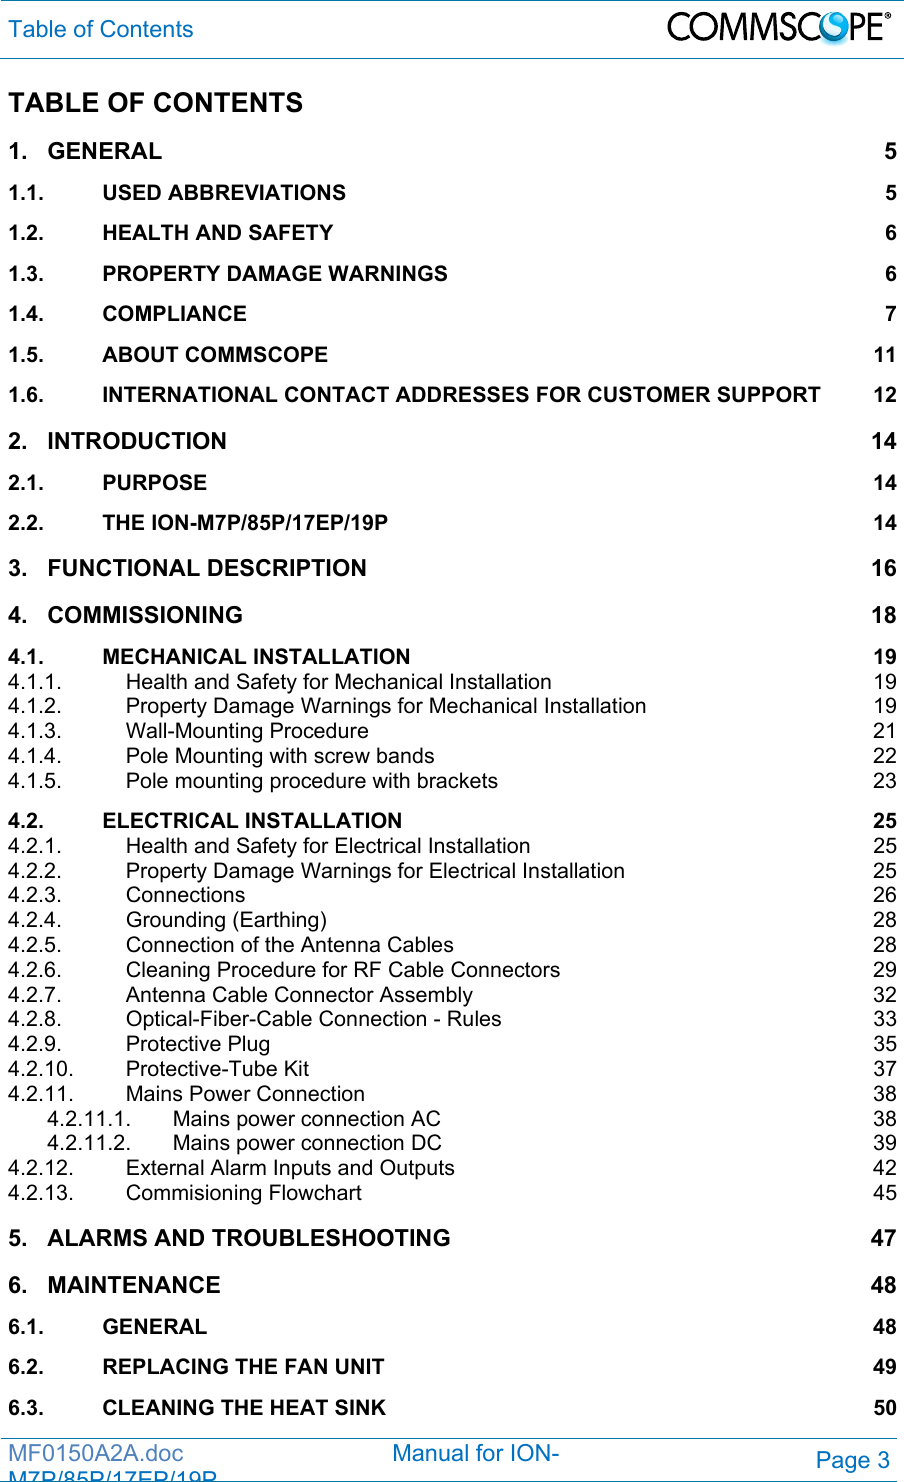 Table of Contents  MF0150A2A.doc                                Manual for ION-M7P/85P/17EP/19PPage 3 TABLE OF CONTENTS 1.GENERAL 51.1.USED ABBREVIATIONS  51.2.HEALTH AND SAFETY  61.3.PROPERTY DAMAGE WARNINGS  61.4.COMPLIANCE 71.5.ABOUT COMMSCOPE  111.6.INTERNATIONAL CONTACT ADDRESSES FOR CUSTOMER SUPPORT  122.INTRODUCTION 142.1.PURPOSE 142.2.THE ION-M7P/85P/17EP/19P  143.FUNCTIONAL DESCRIPTION  164.COMMISSIONING 184.1.MECHANICAL INSTALLATION  194.1.1.Health and Safety for Mechanical Installation  194.1.2.Property Damage Warnings for Mechanical Installation  194.1.3.Wall-Mounting Procedure  214.1.4.Pole Mounting with screw bands  224.1.5.Pole mounting procedure with brackets  234.2.ELECTRICAL INSTALLATION  254.2.1.Health and Safety for Electrical Installation  254.2.2.Property Damage Warnings for Electrical Installation  254.2.3.Connections 264.2.4.Grounding (Earthing)  284.2.5.Connection of the Antenna Cables  284.2.6.Cleaning Procedure for RF Cable Connectors  294.2.7.Antenna Cable Connector Assembly  324.2.8.Optical-Fiber-Cable Connection - Rules  334.2.9.Protective Plug  354.2.10.Protective-Tube Kit  374.2.11.Mains Power Connection  384.2.11.1.Mains power connection AC  384.2.11.2.Mains power connection DC  394.2.12.External Alarm Inputs and Outputs  424.2.13.Commisioning Flowchart  455.ALARMS AND TROUBLESHOOTING  476.MAINTENANCE 486.1.GENERAL 486.2.REPLACING THE FAN UNIT  496.3.CLEANING THE HEAT SINK  50